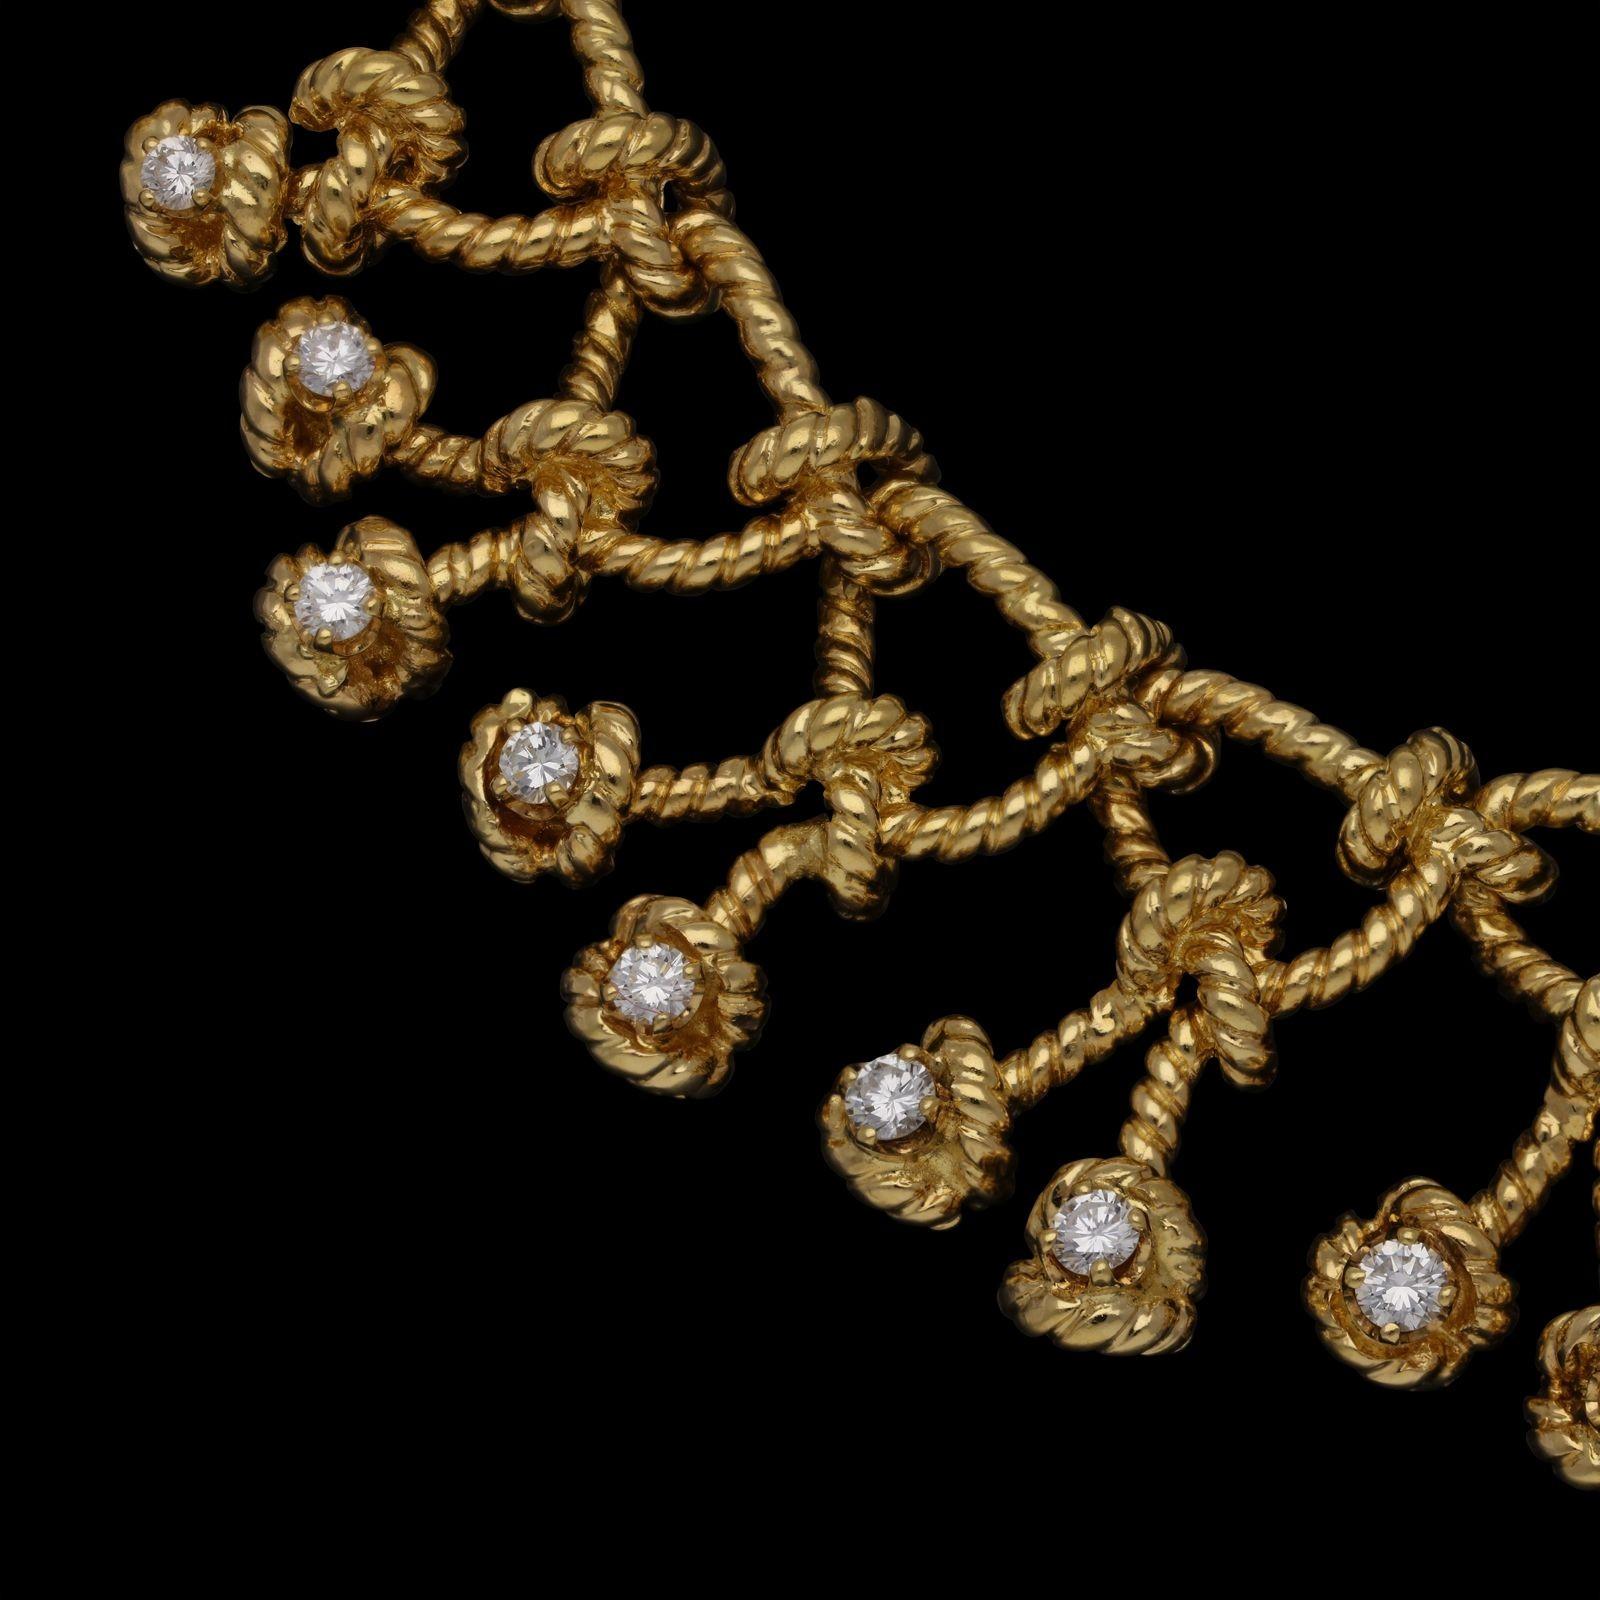 A beautiful gold and diamond ‘Regatta’ necklace by Verdura, c.1970s, the bib-style necklace of openwork design formed of 18ct yellow gold twisted rope work loop motifs each suspending either a single or double rope knot set to the end with a round